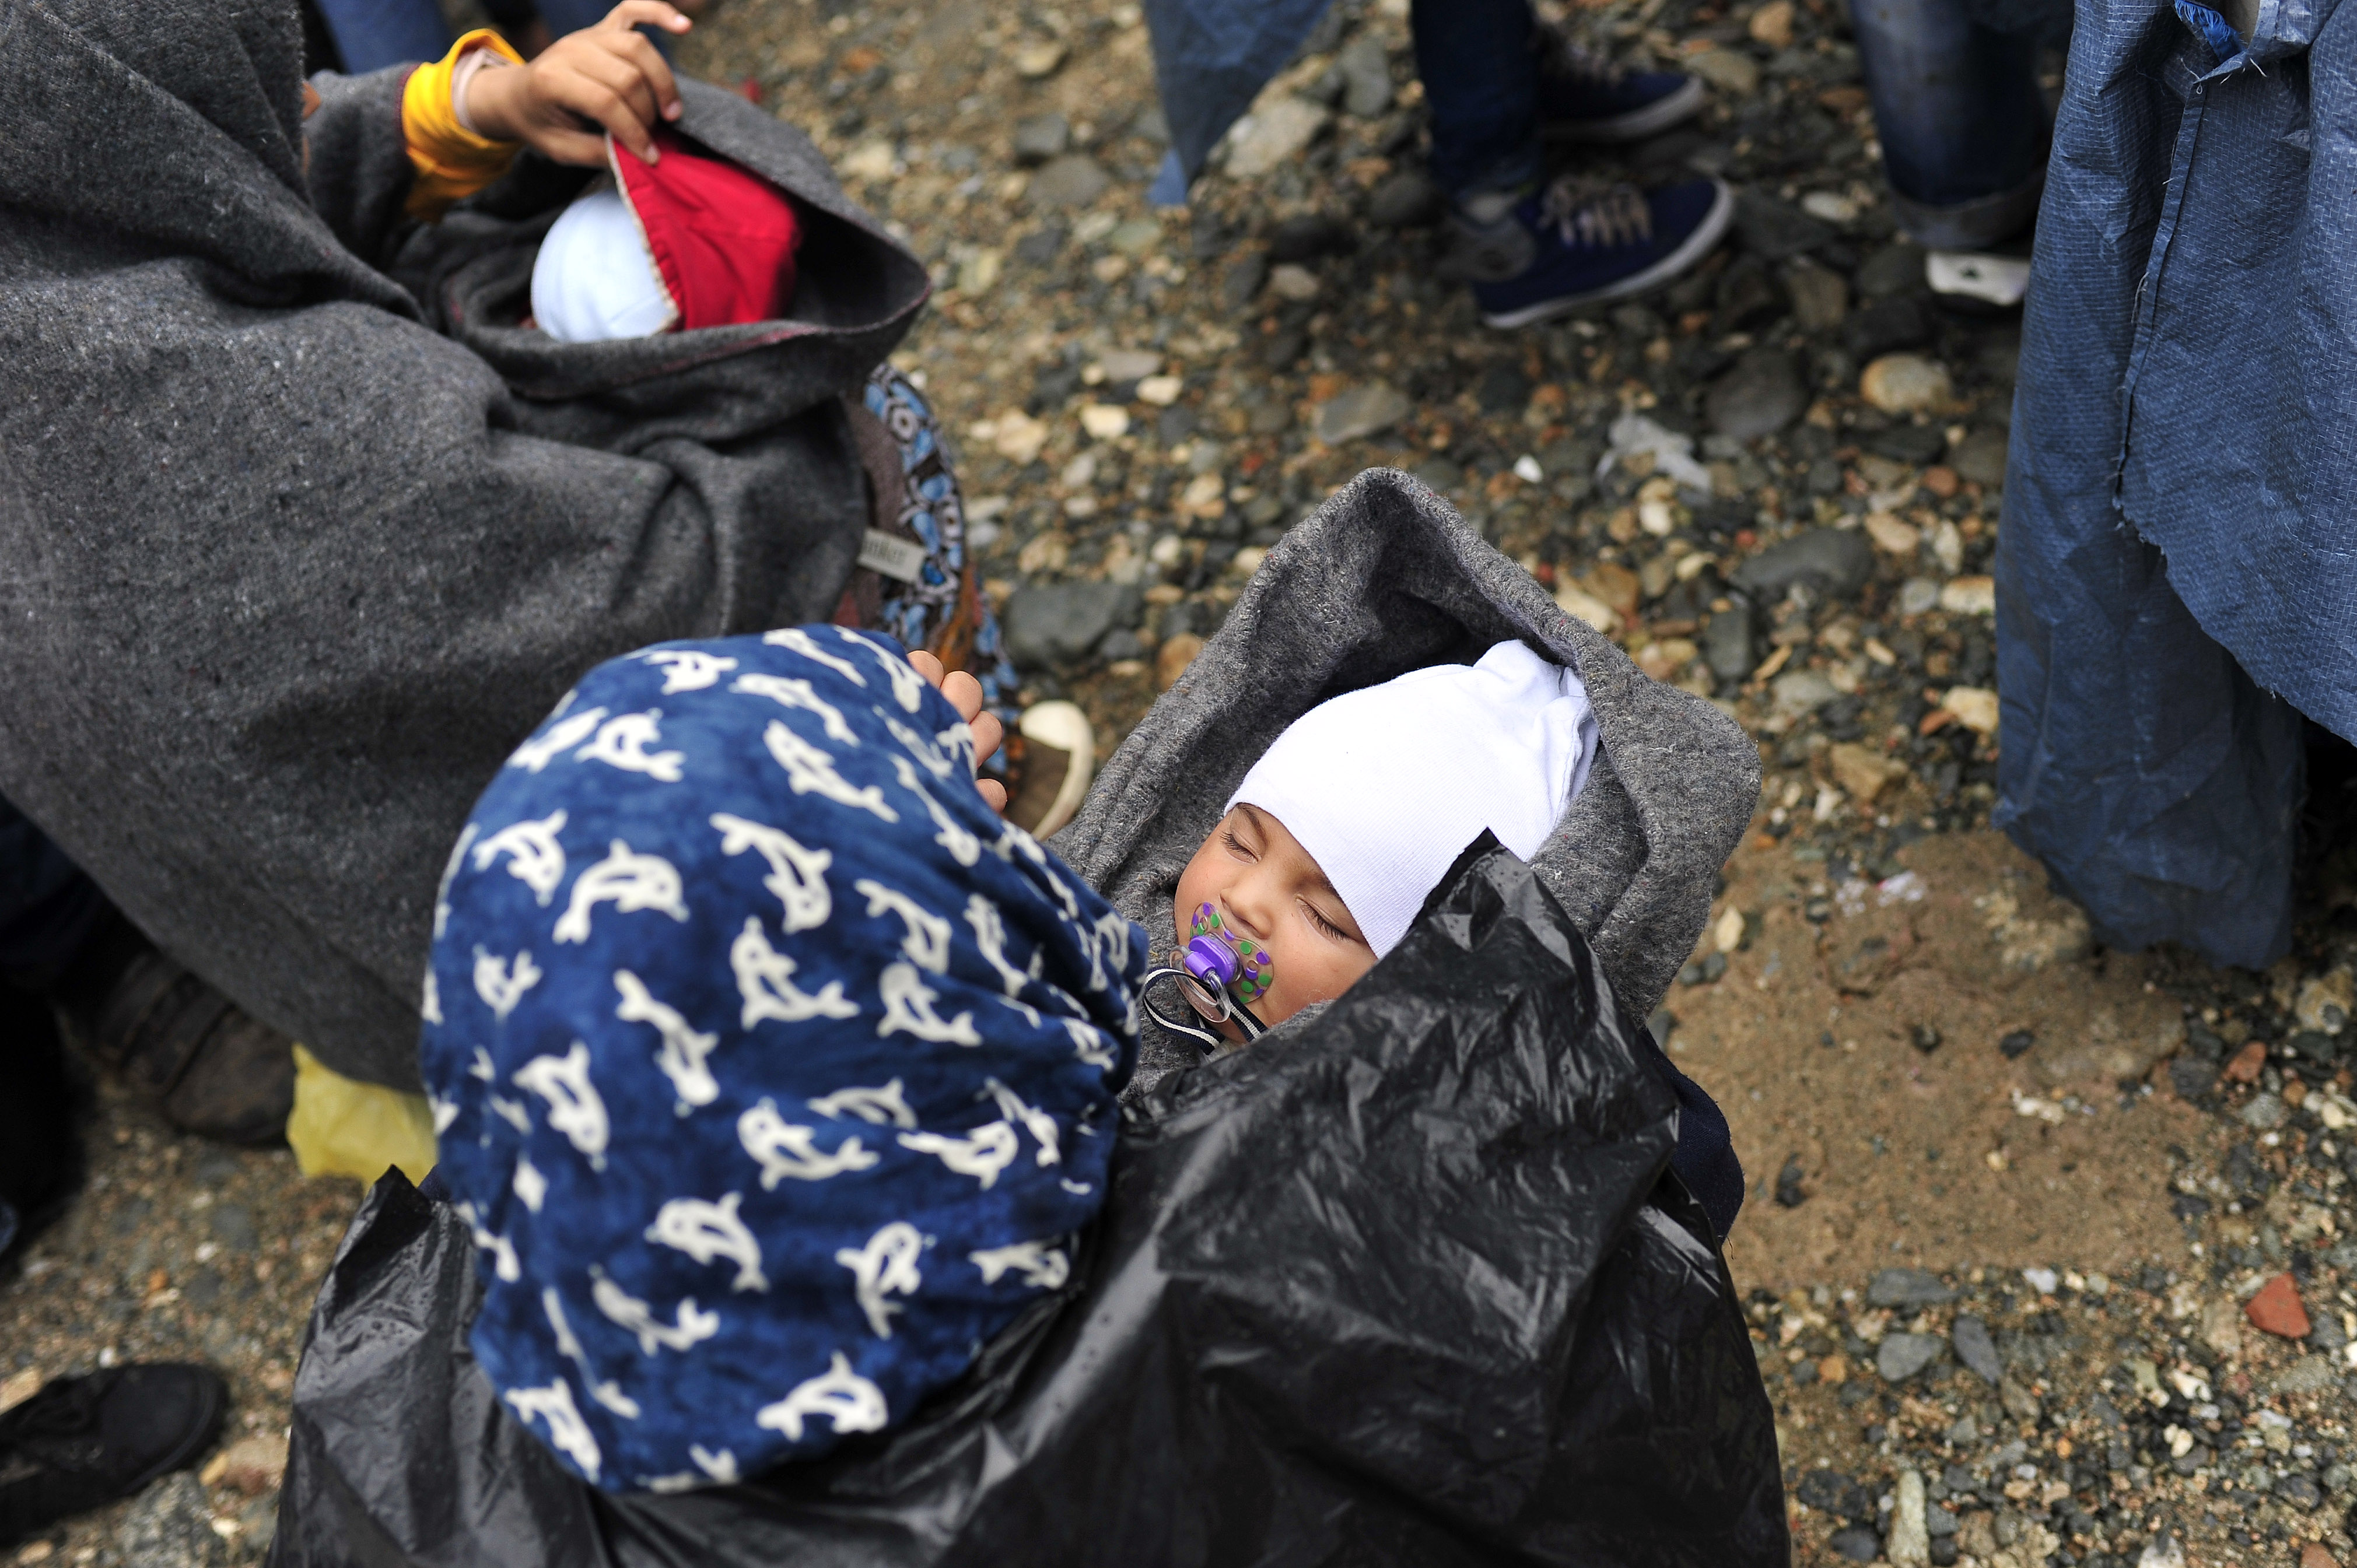 Seated on the wet, rocky ground, a woman holds an infant on a rainy day, near the town of Gevgelija, on the border with Greece on Sept. 10, 2015. Others who have fled their homes amid the ongoing refugee and migrant crisis are nearby.